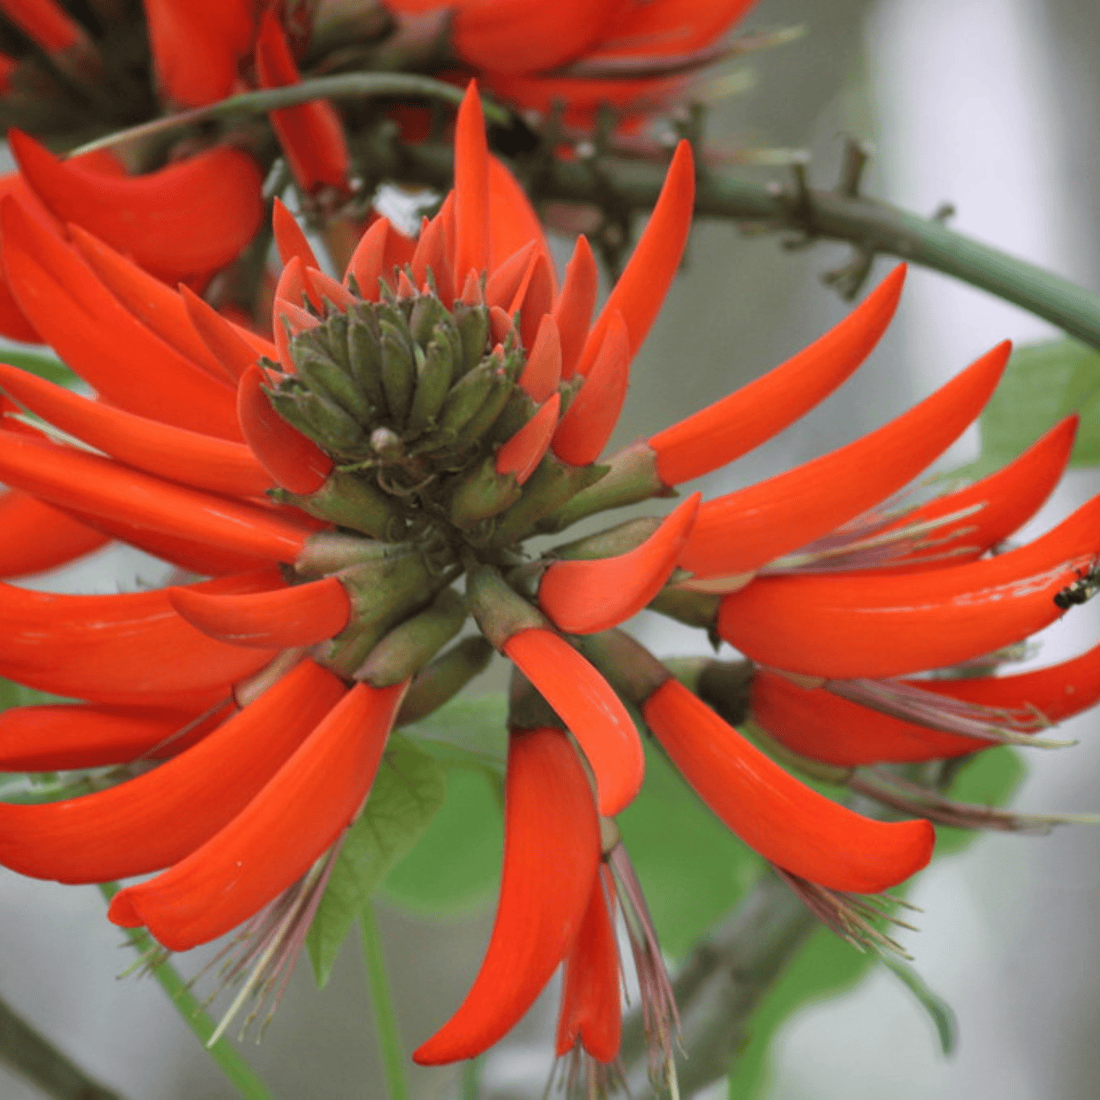 Himalayan Coral Tree (Erythrina arborescens) Flowering Live Plant